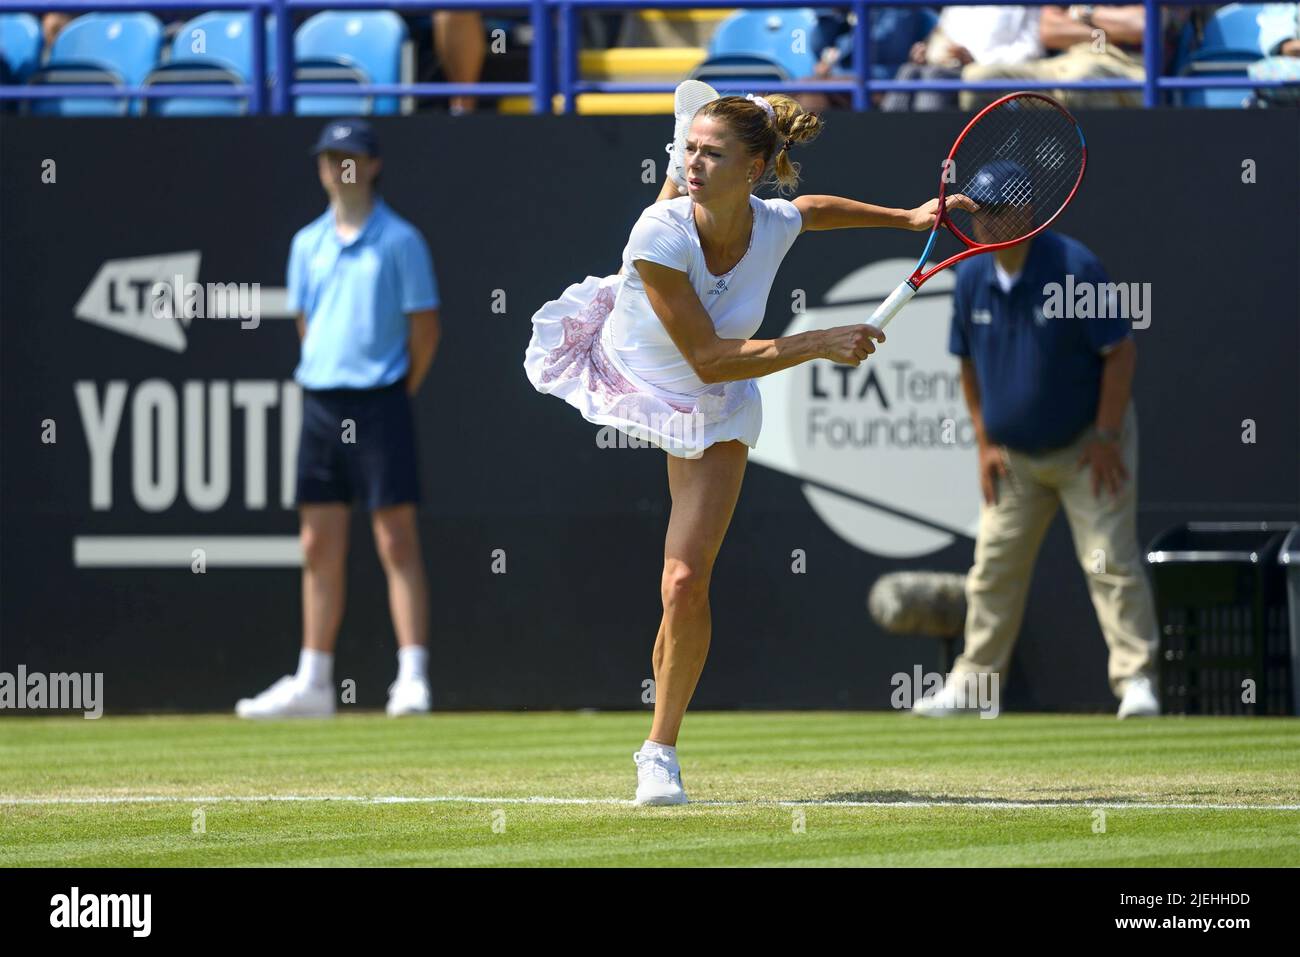 Camila Giorgi (Italy) playing in the semi-final on centre court at the Rothesay International Tennis, Devonshire Park, Eastbourne, UK. 24th June. She Stock Photo